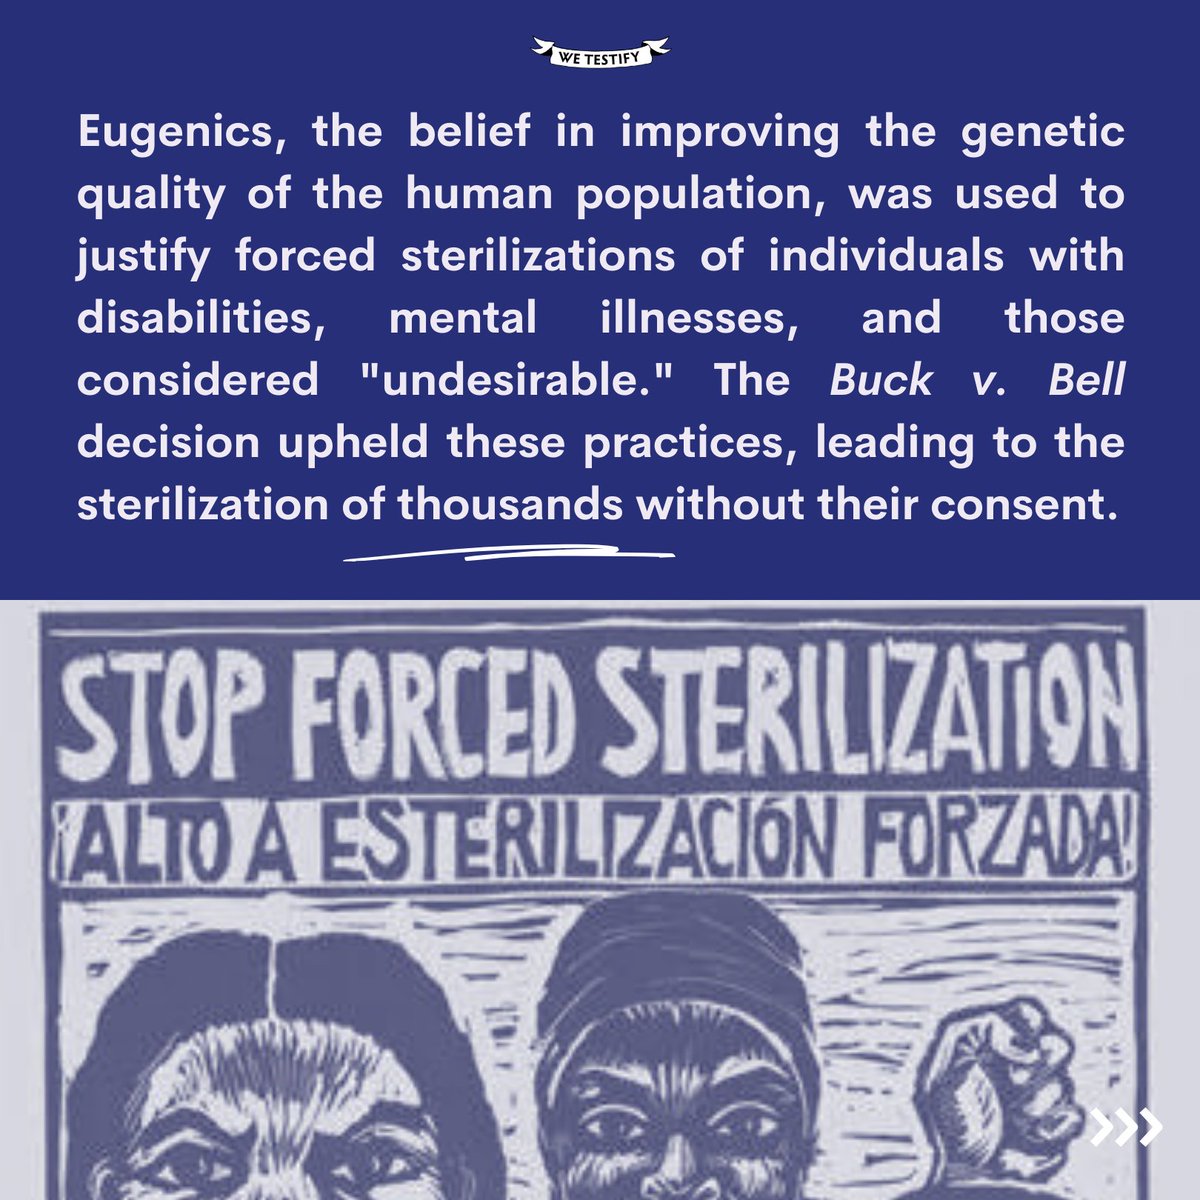 Before our rights as disabled people became more protected through policies and healthcare reform, as many as 70,000 disabled people, people of color, and women were forcibly sterilized in the 20th century as a result of these eugenic ideologies.